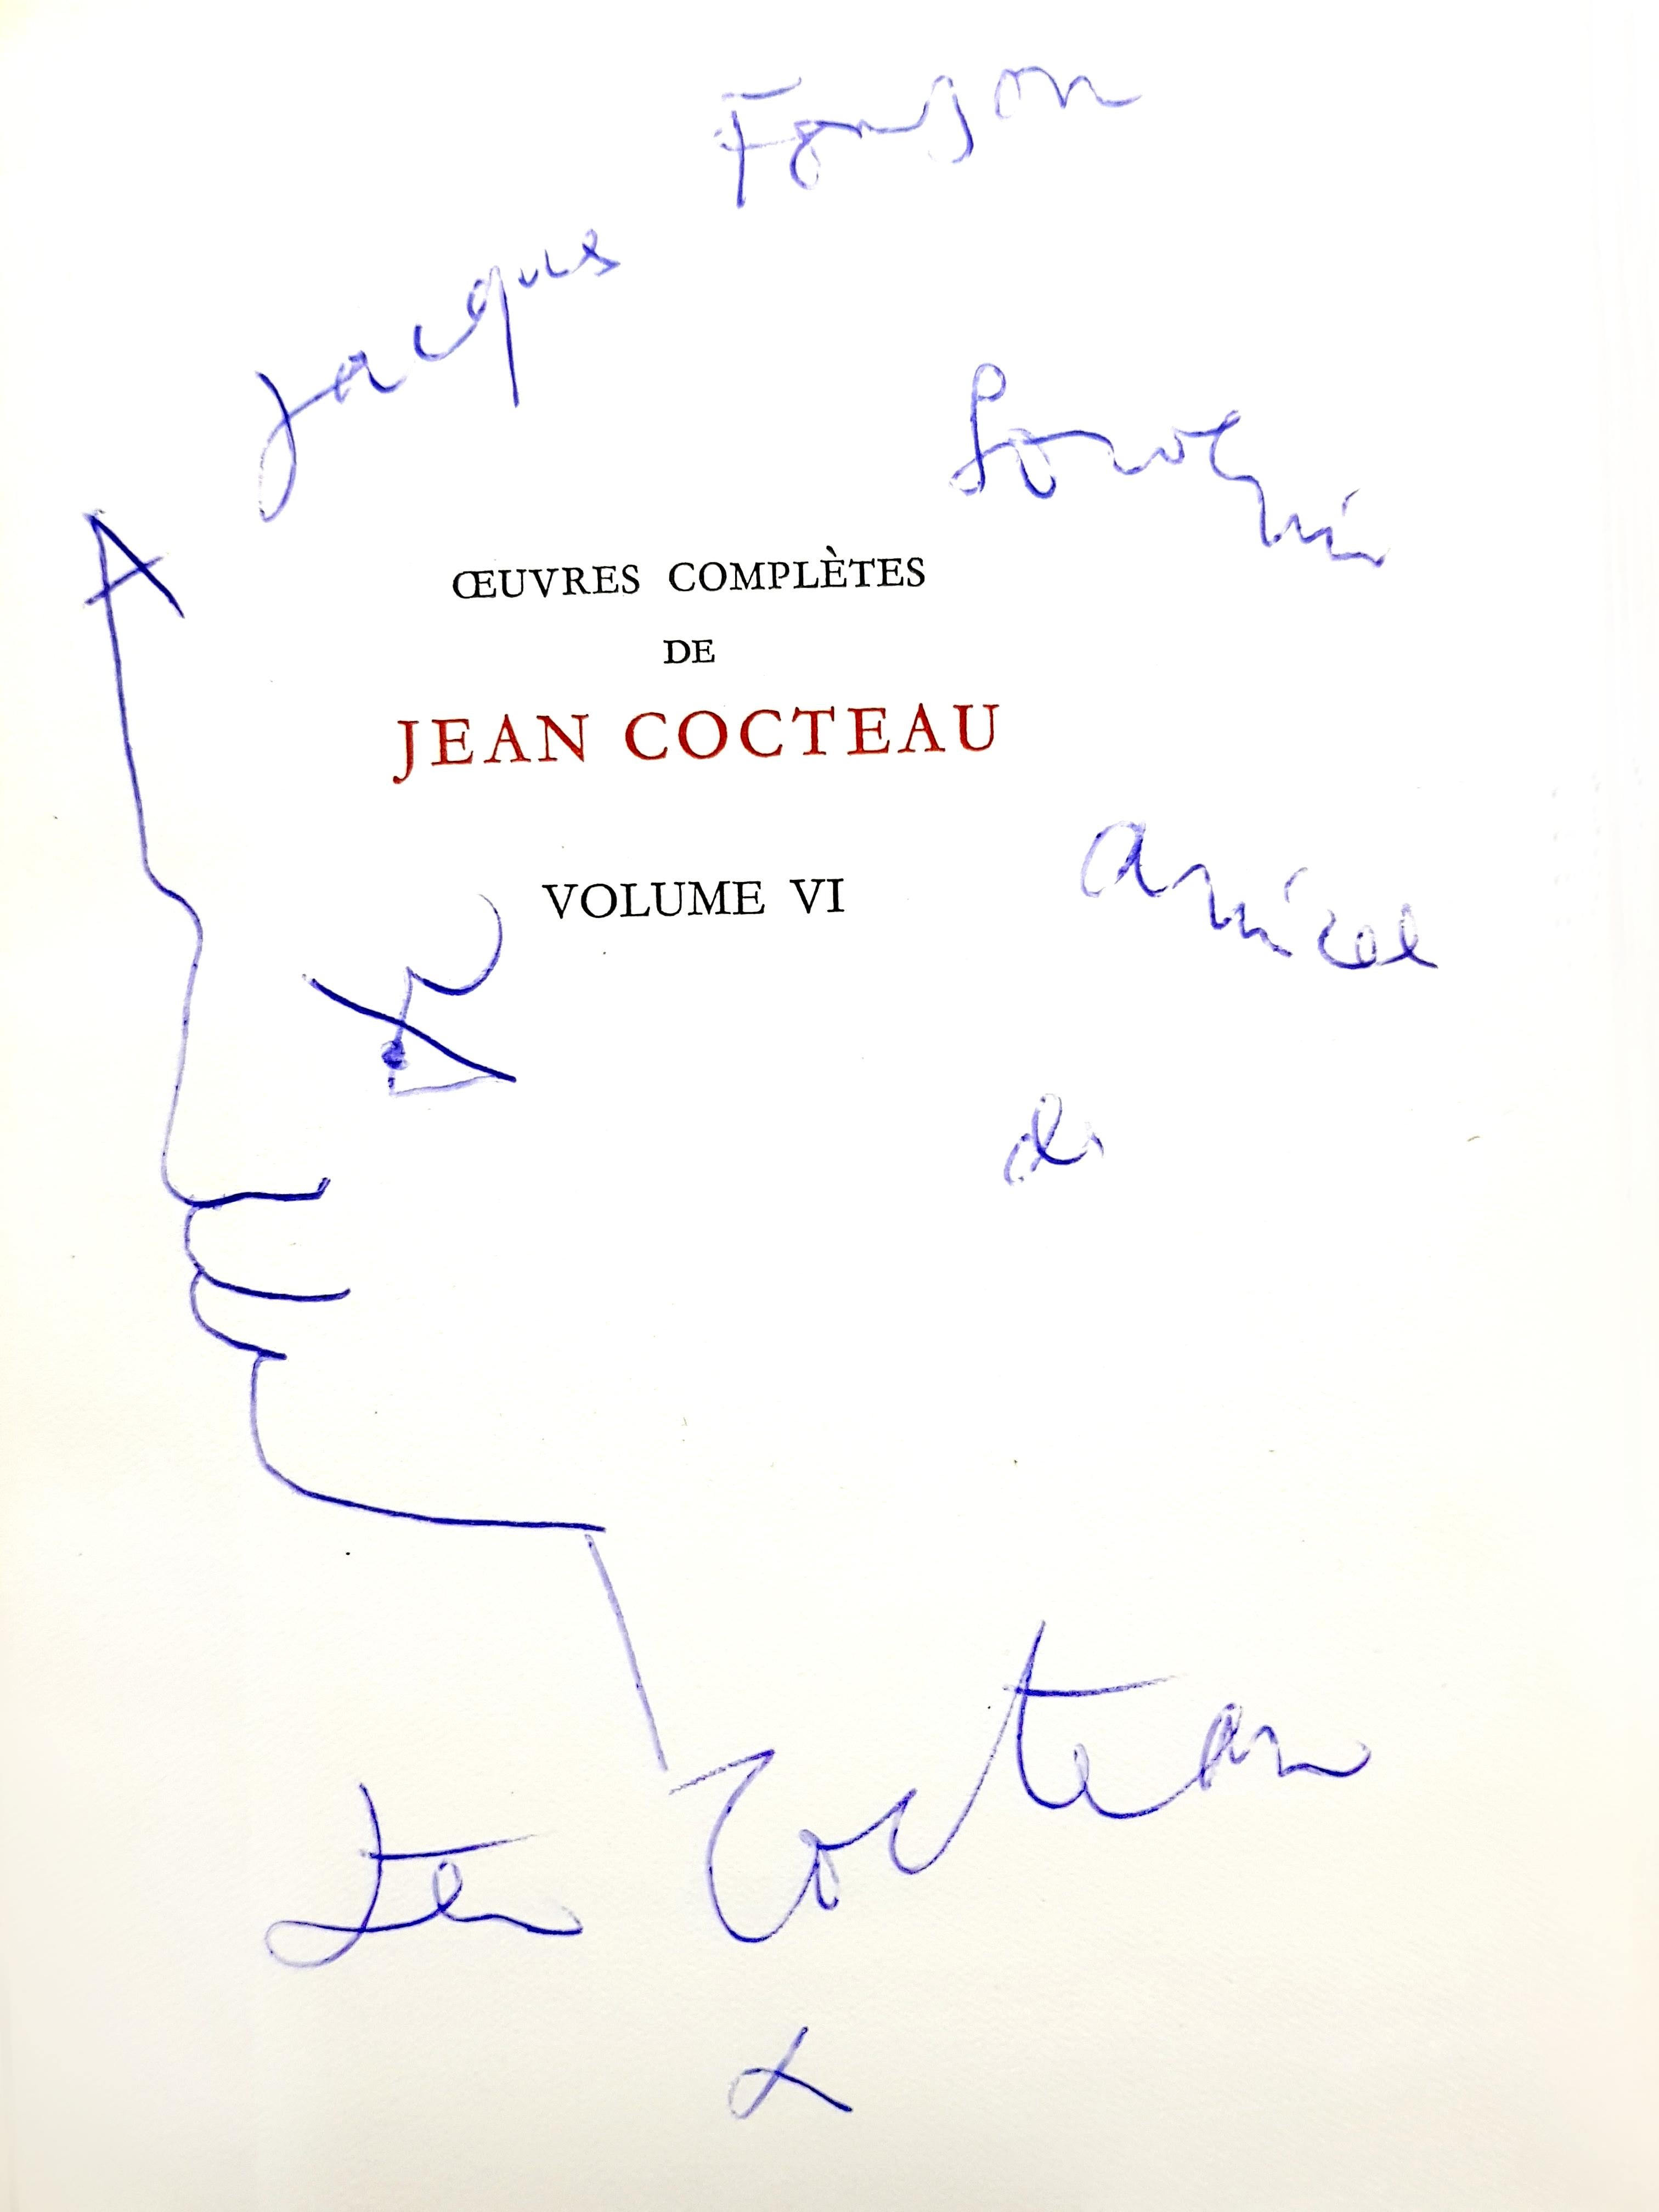 Exceptional set of complete works, dedicated, with 8 original endpage drawings - Surrealist Art by Jean Cocteau